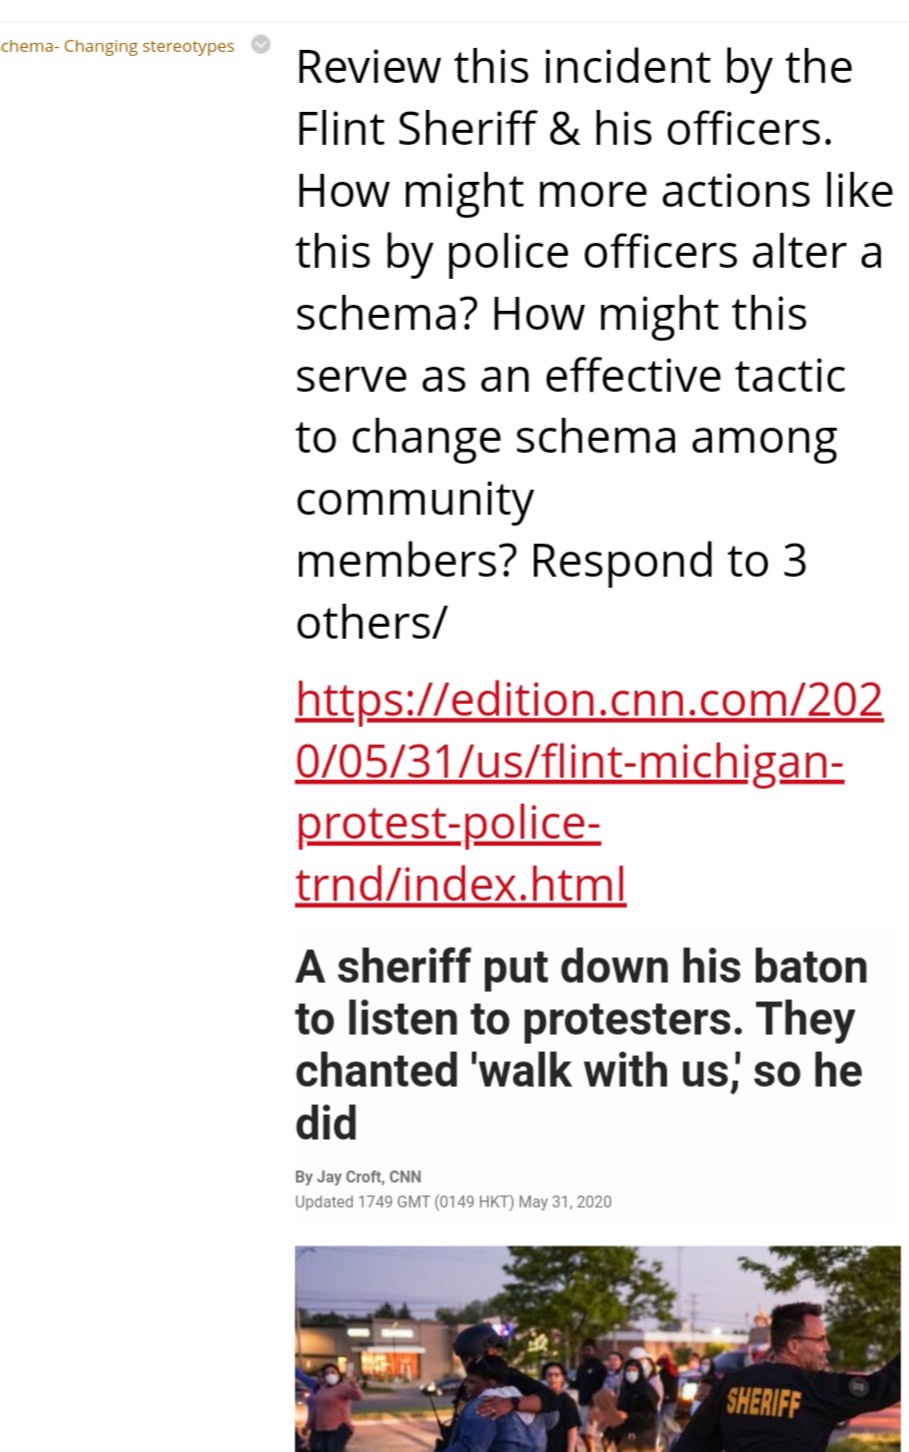 chema- Changing stereotypes
Review this incident by the
Flint Sheriff & his officers.
How might more actions like
this by police officers alter a
schema? How might this
serve as an effective tactic
to change schema among
community
members? Respond to 3
others/
https://edition.cnn.com/202
0/05/31/us/flint-michigan-
protest-police-
trnd/index.html
A sheriff put down his baton
to listen to protesters. They
chanted 'walk with us, so he
did
By Jay Croft, CNN
Updated 1749 GMT (0149 HKT) May 31, 2020
SHERIFF